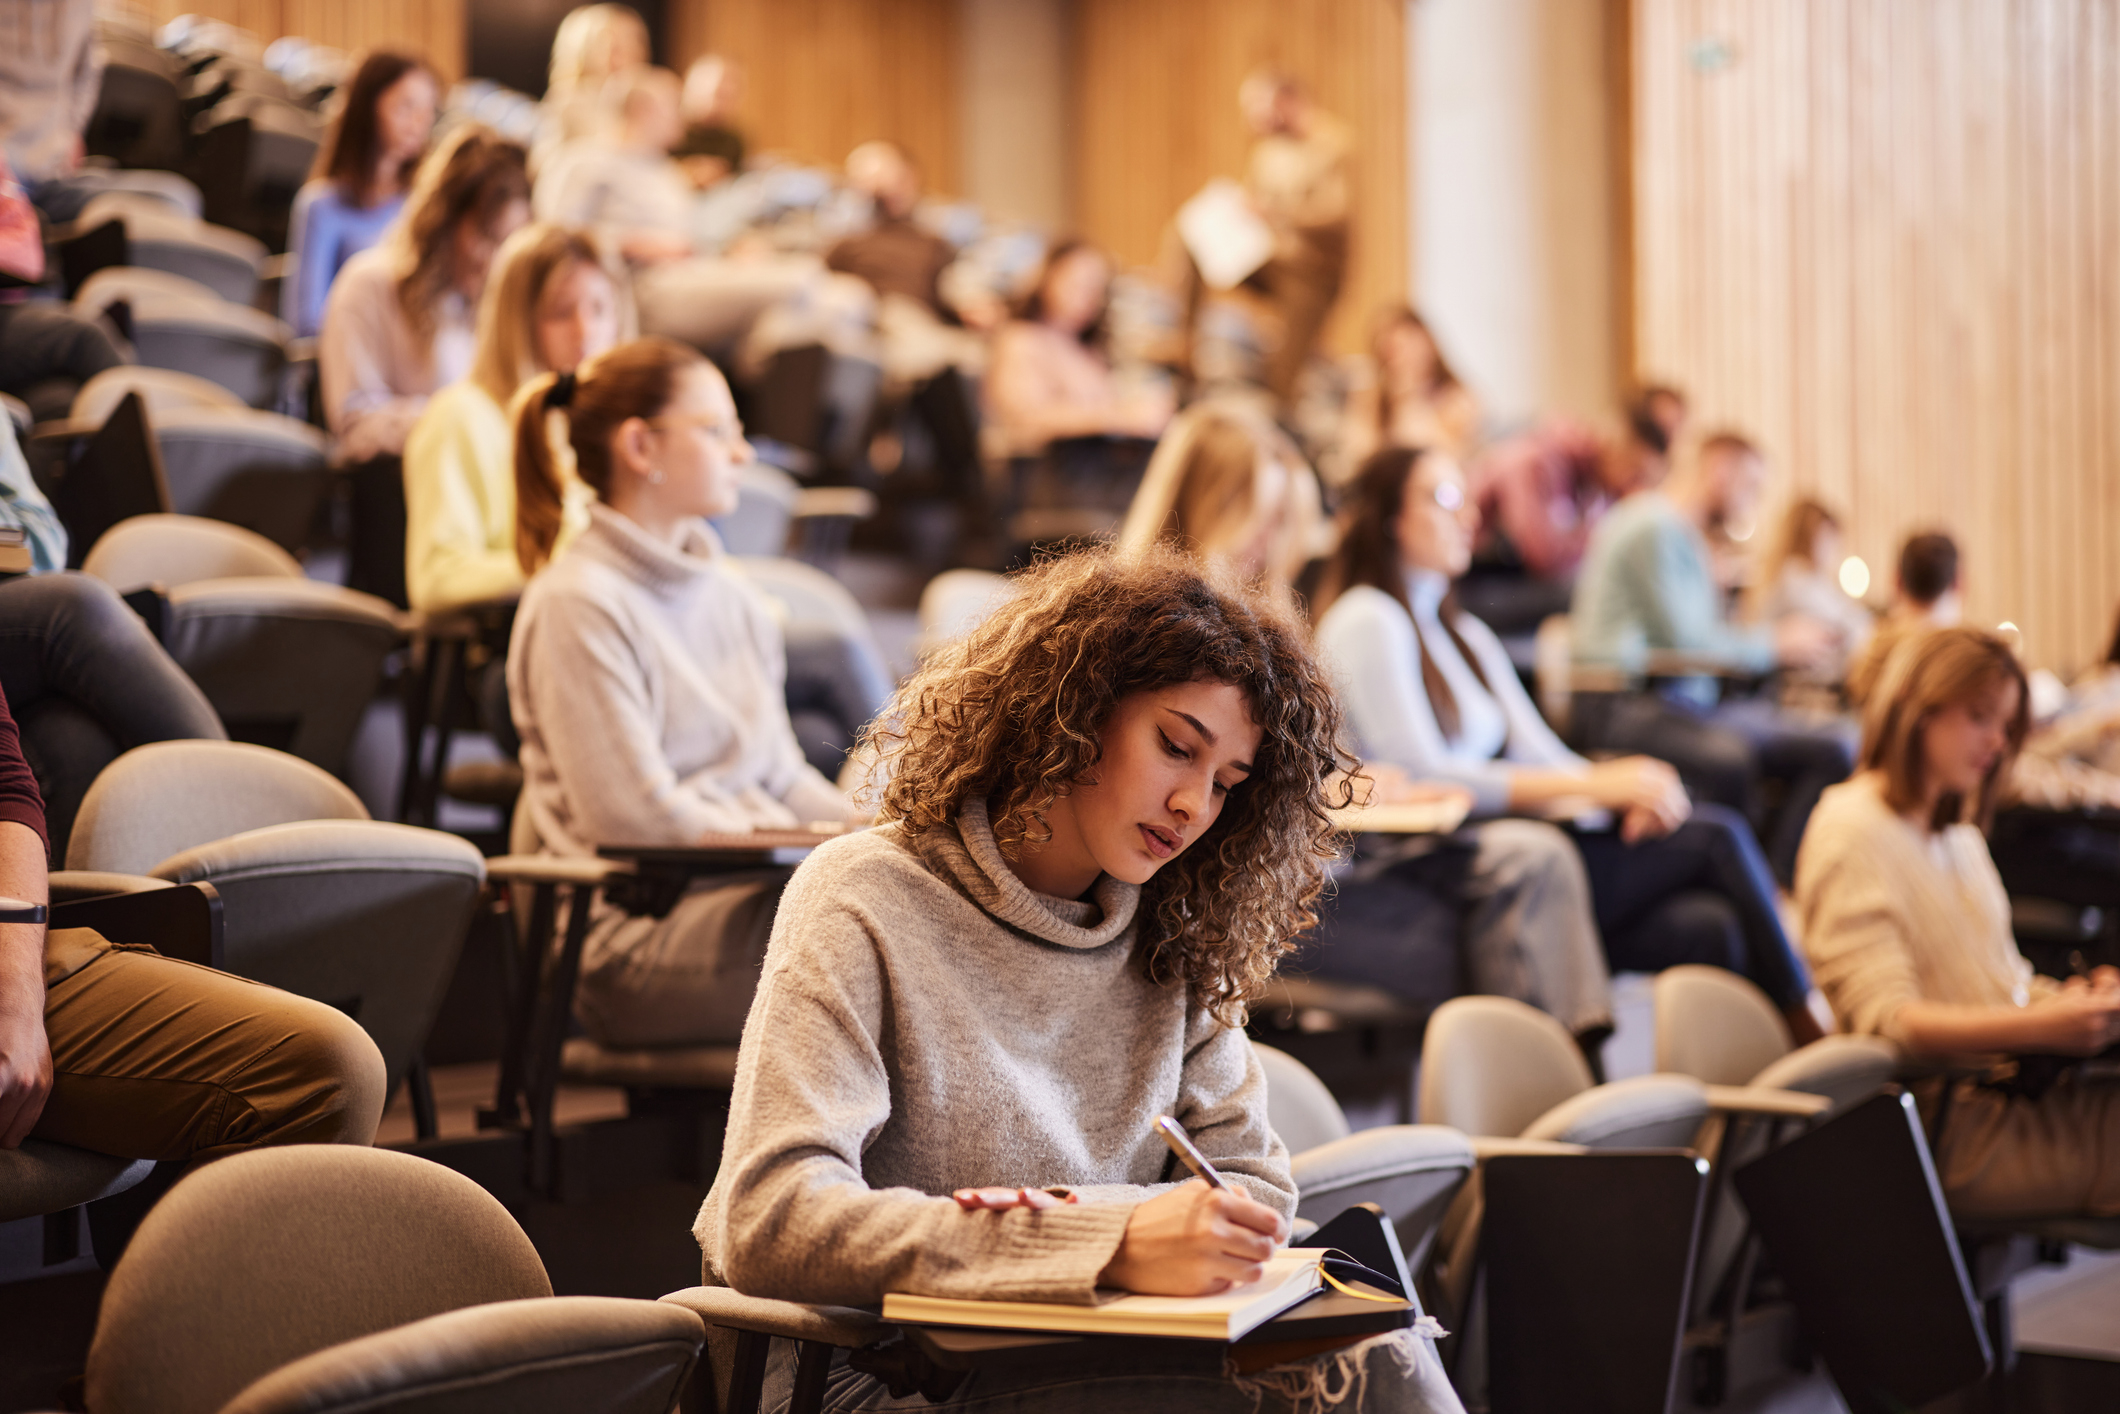 A student takes notes in a lecture hall filled with attendees